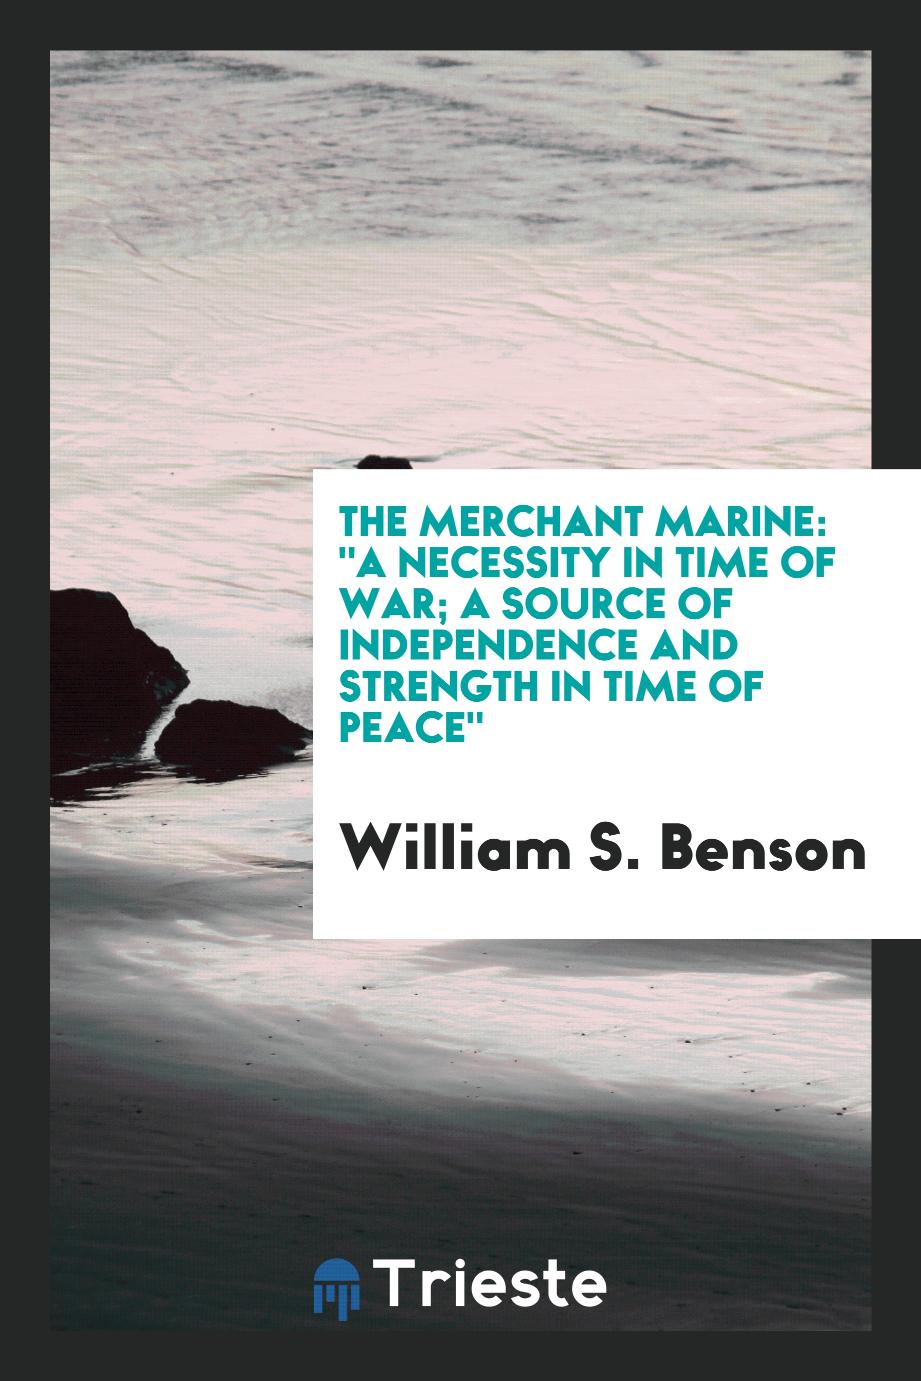 The Merchant Marine: "A Necessity in Time of War; A Source of Independence and Strength in Time of Peace"